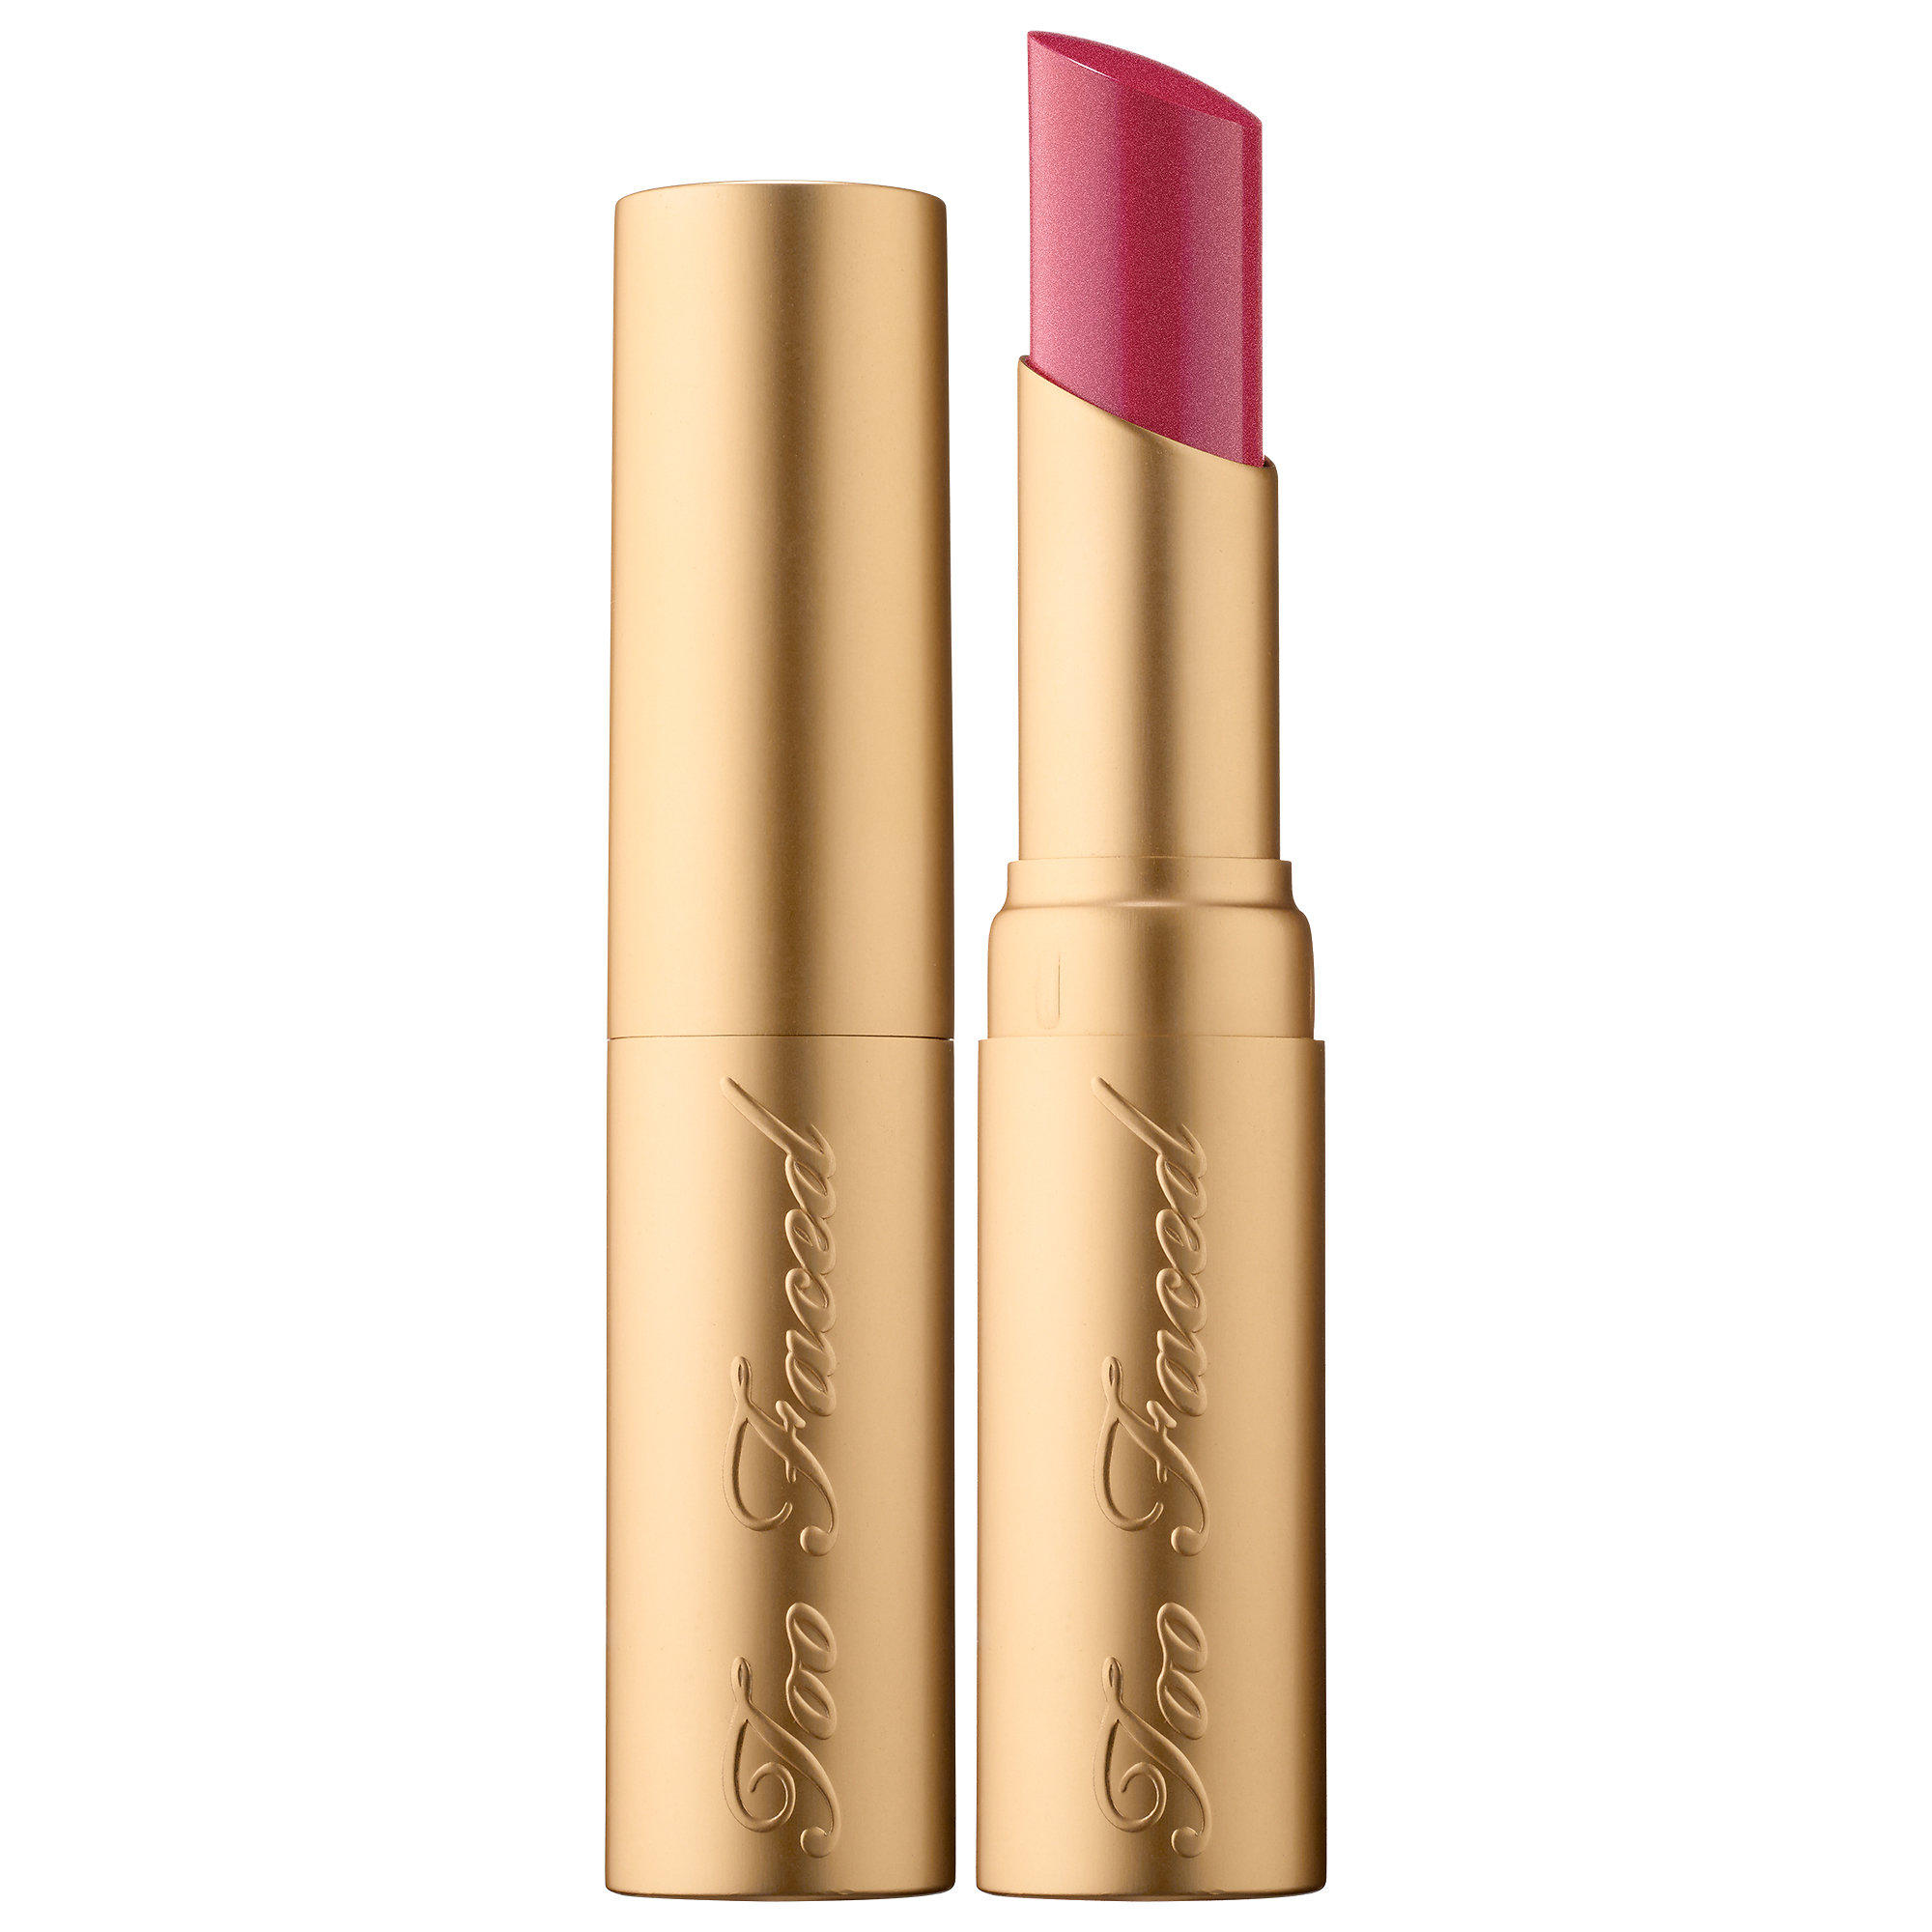 Too Faced La Creme Color Drenched Lipstick Mean Girls